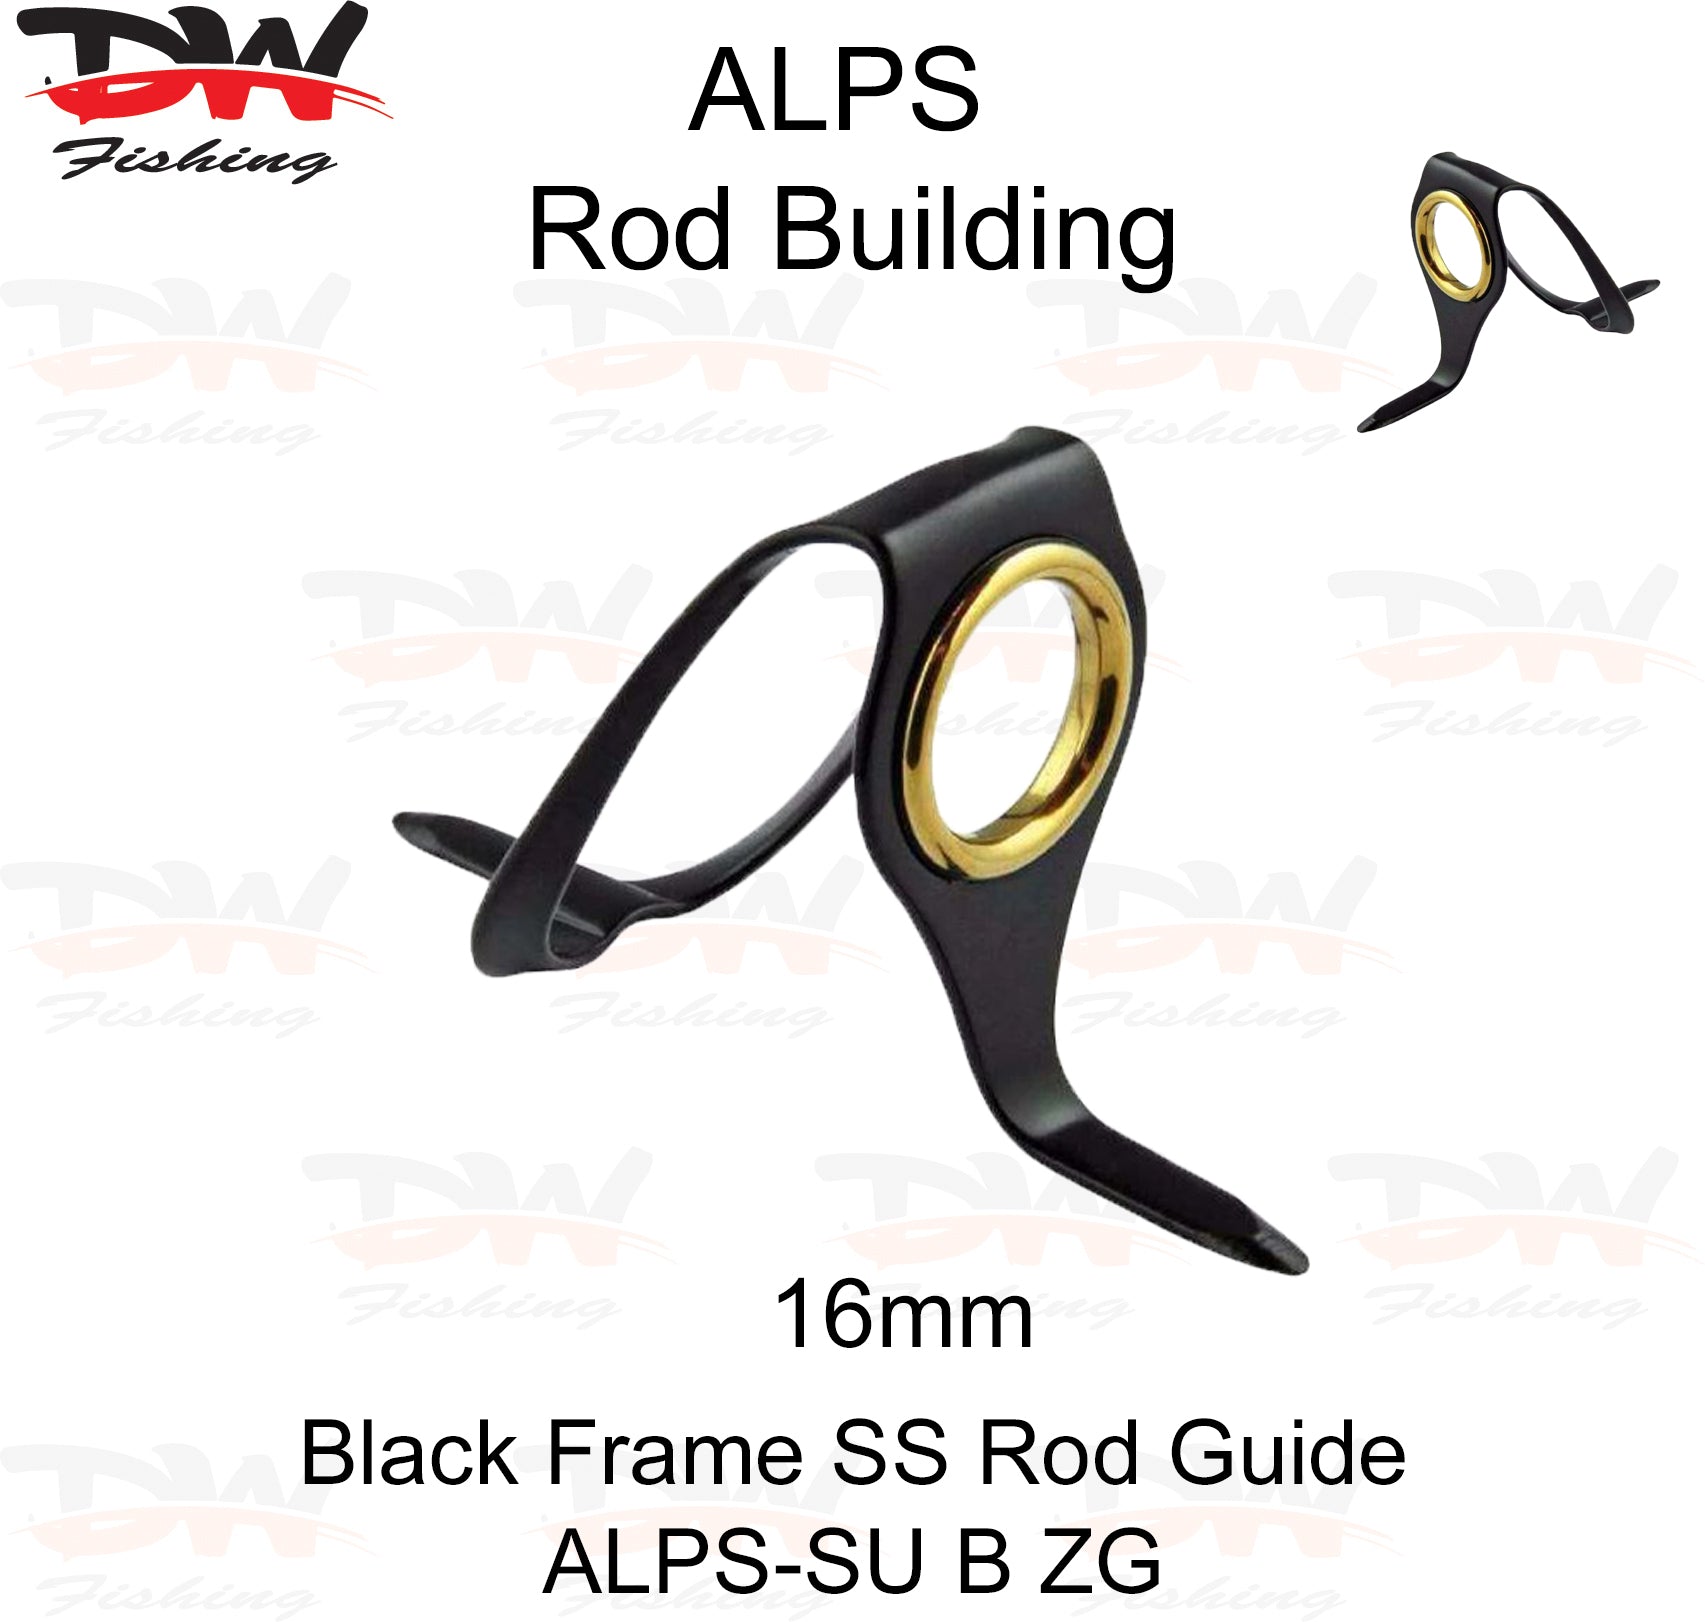 ALPS Stand Up Rod Guide Black/Gold, Rod Building